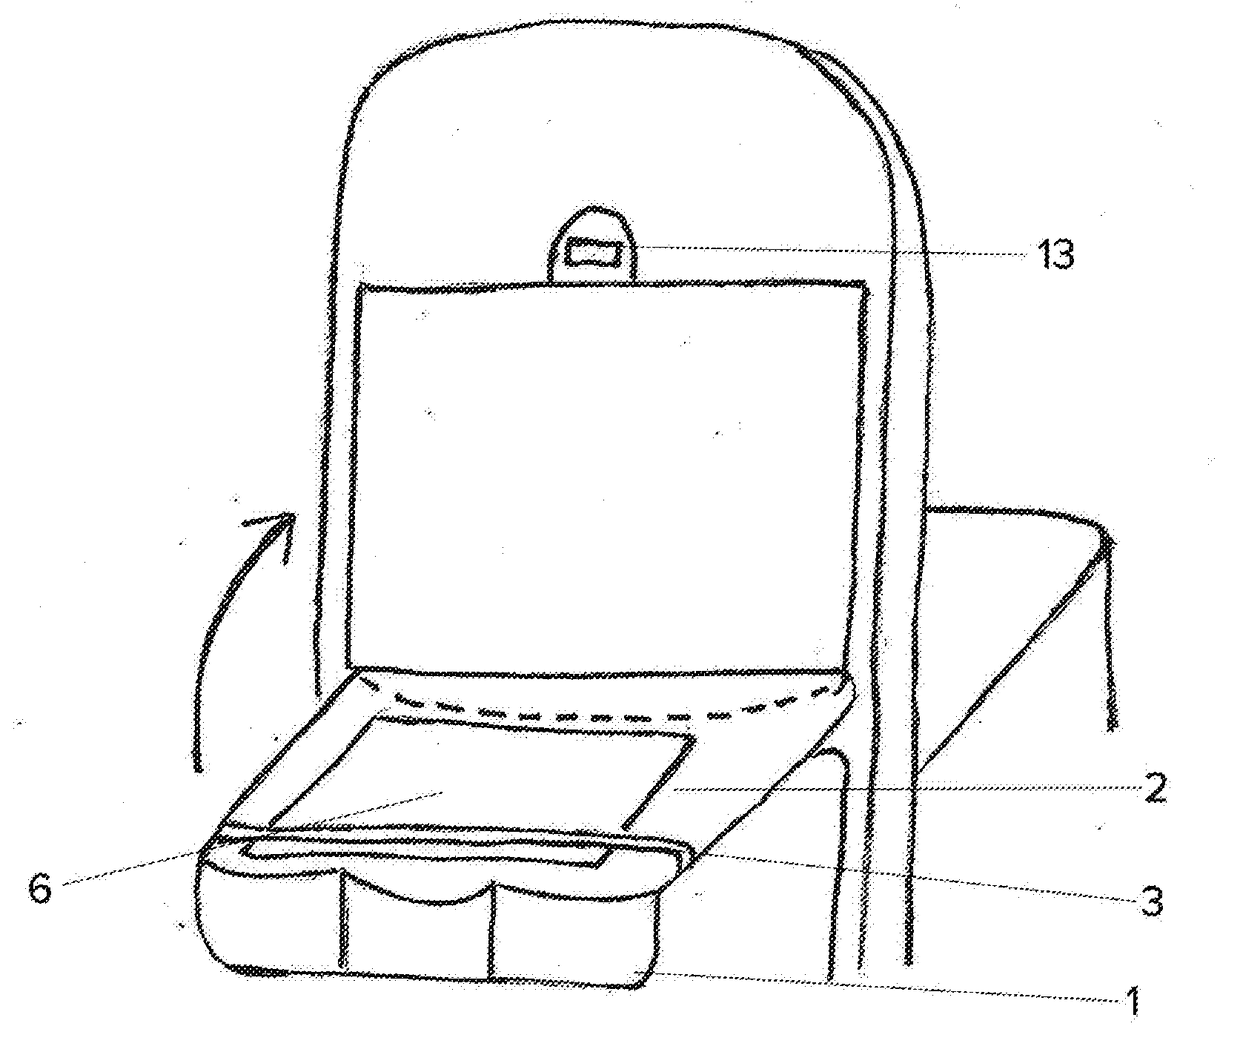 Cloth Tray Cover For Tray Tables Found On Airplanes, Trains Or Cars, Having Assorted Pockets Of Diverse Utility, Including A Clear Sleeve Pocket On The Surface Of The Tray, An Adjustable Viewing Pocket For Electronic Devices, And A Collapsible Drink Holder For Use When The Tray Table Is In The Locked Position